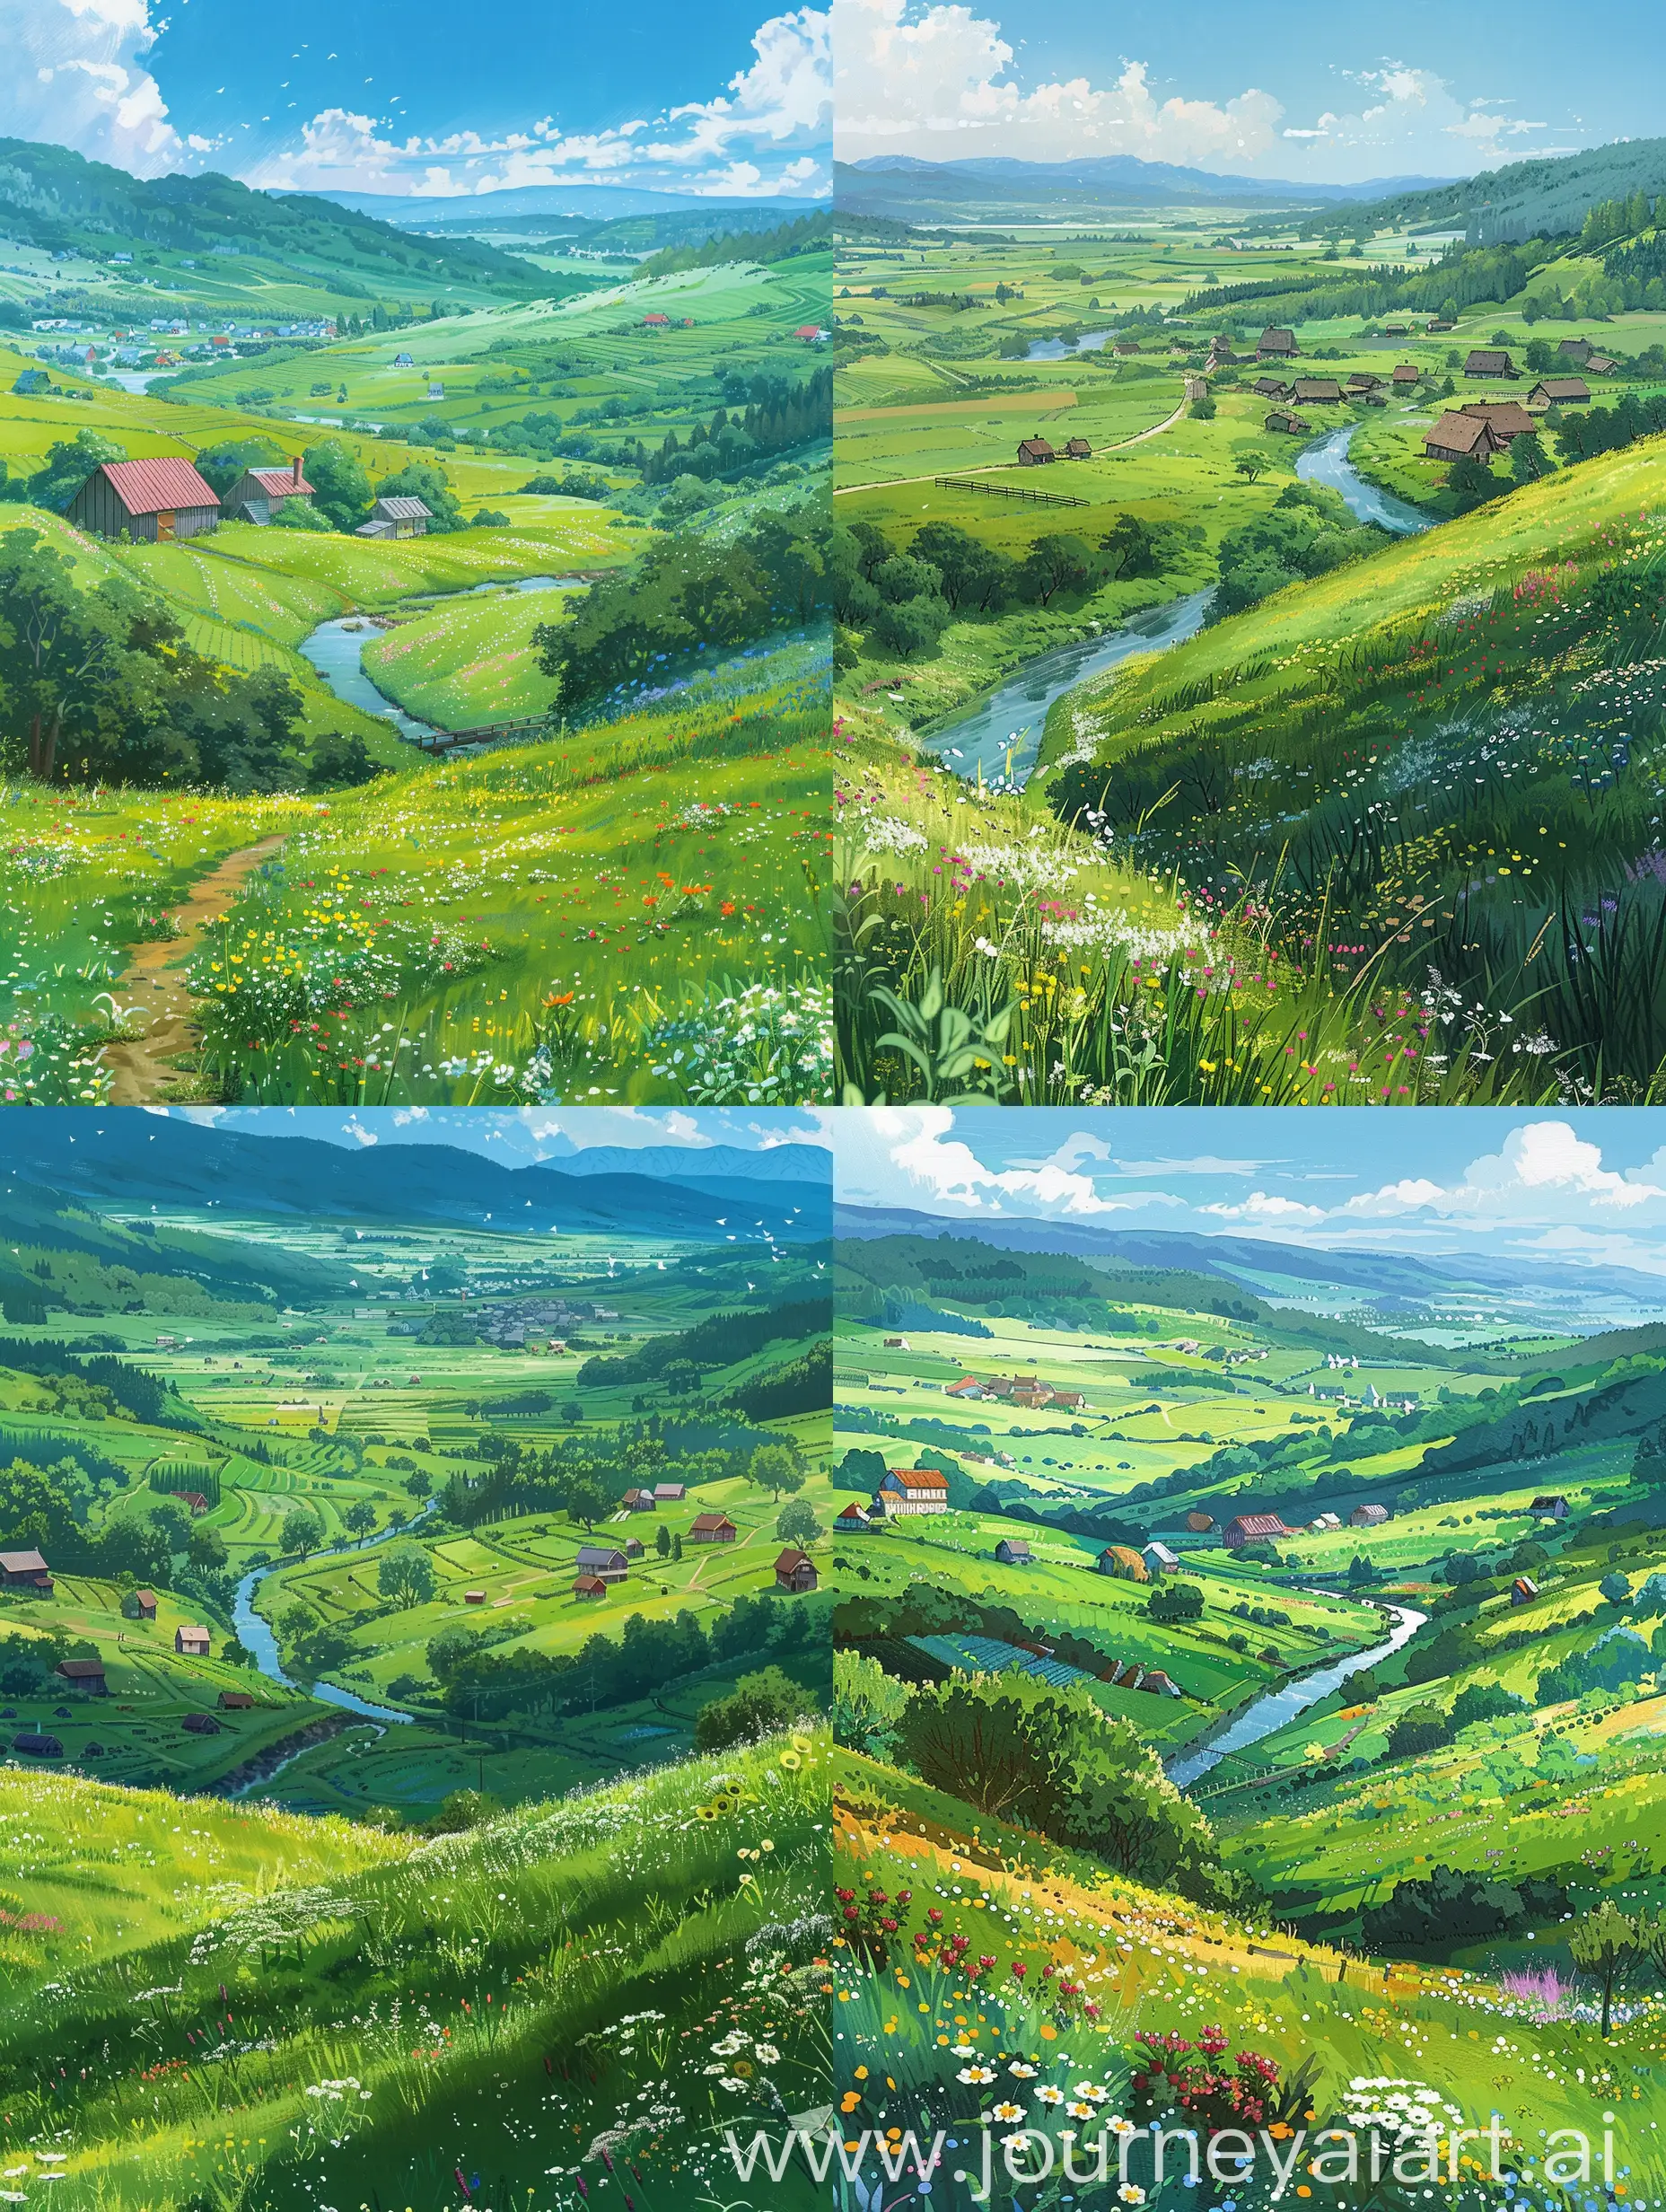 Ghibli anime, Makoto Shinkai style of Rolling hills and green fields stretch out as far as the eye can see, with farmhouses and barns dotting the landscape. A meandering river winds through the fields, and wildflowers bloom in the meadows. In the distance, a small town can be seen nestled in the valley.